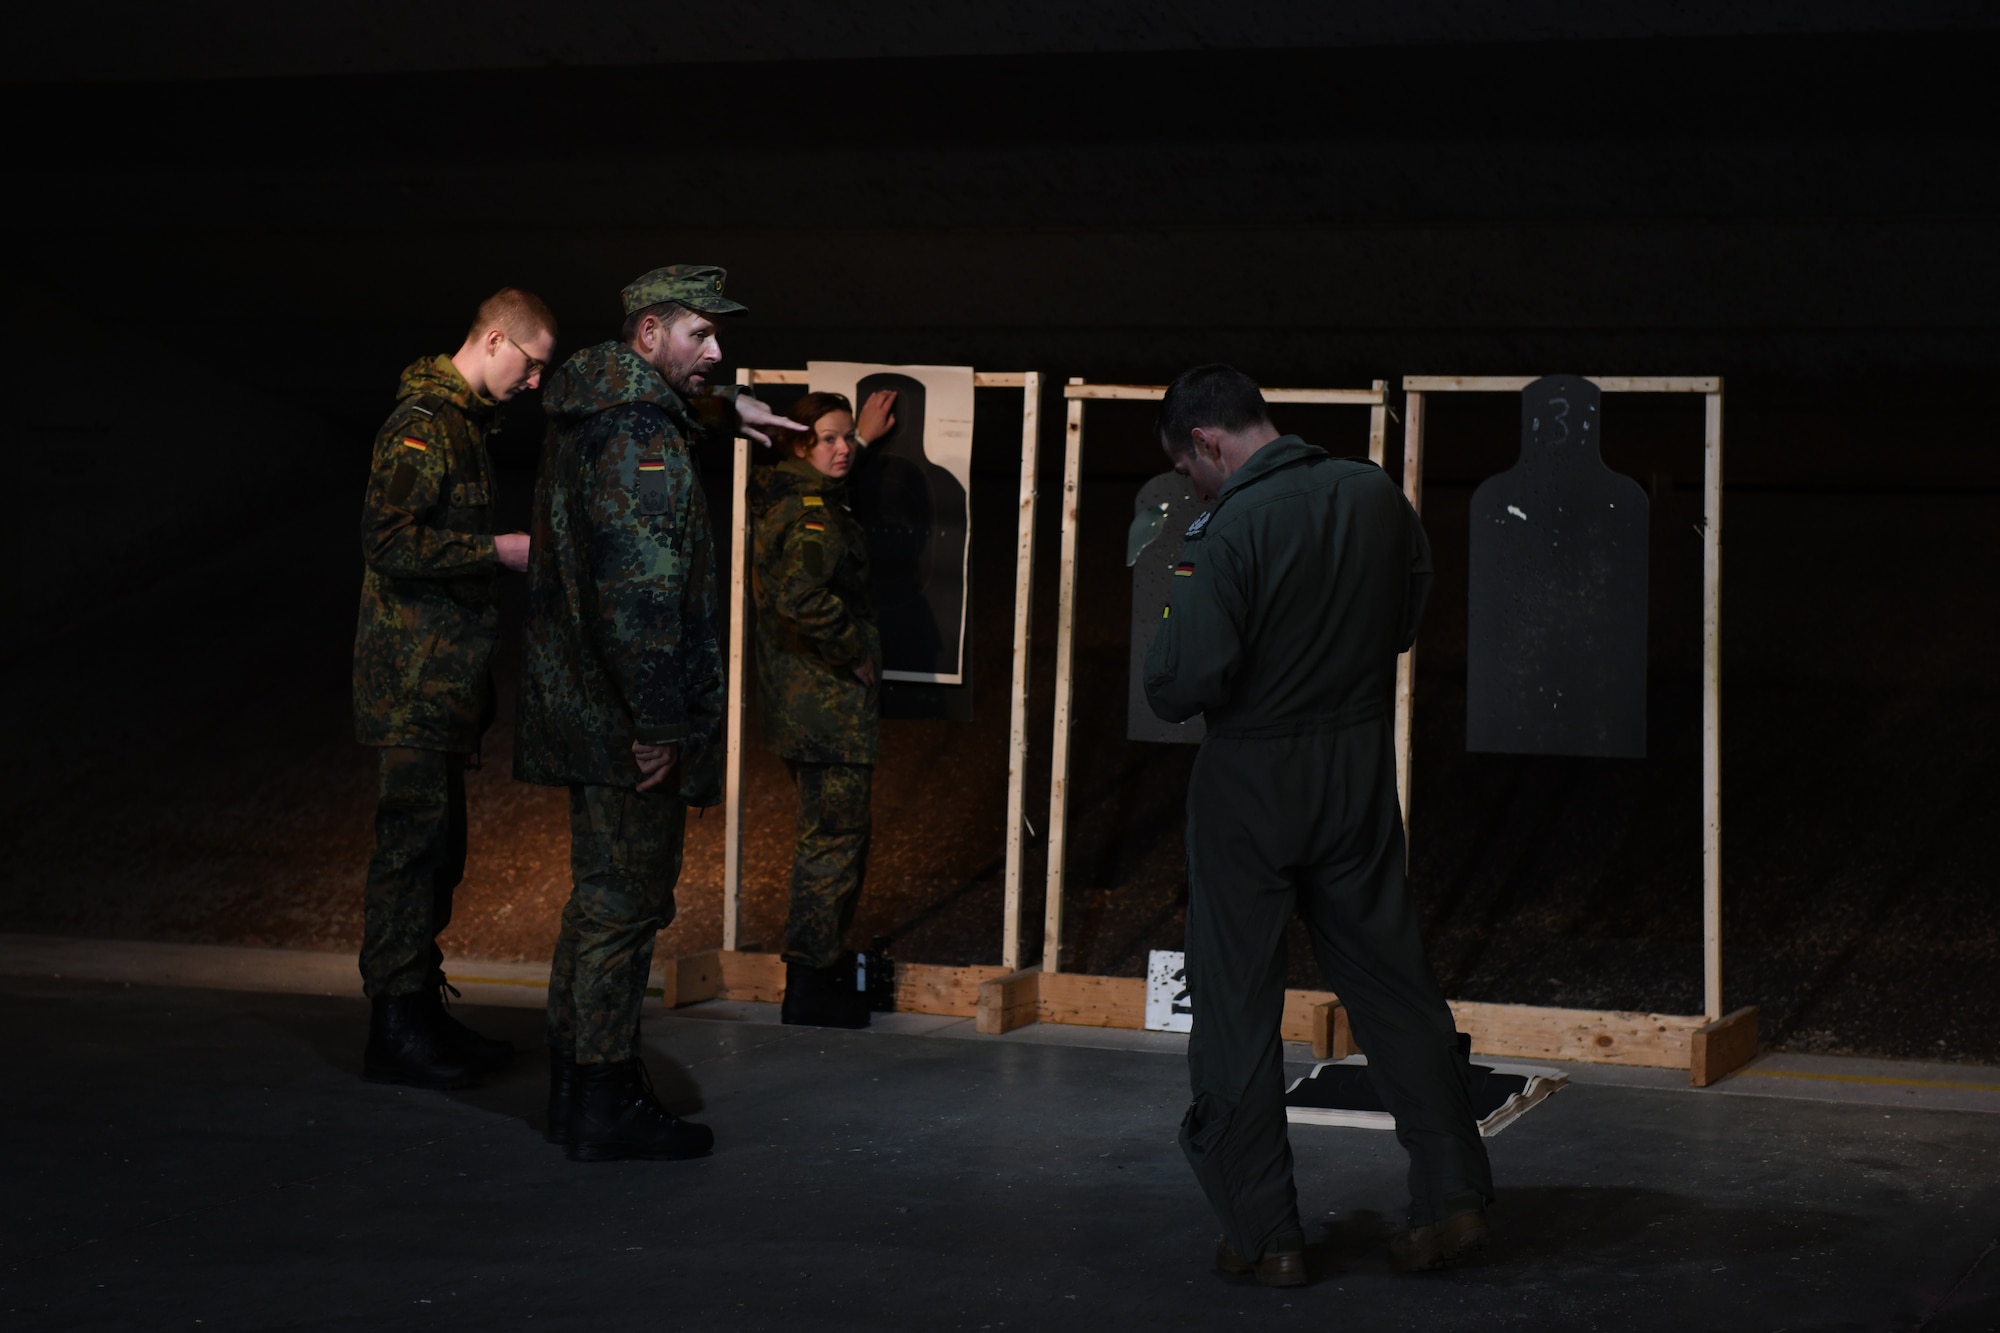 A group of German officers prepare targets for the pistol qualification portion of the German Armed Forces Proficiency Test at the Combat Arms and Maintenance facility at Ellsworth Air Force Base, S.D., Sept. 21, 2019. Participants had to complete six events comprised of a 100-meter swim in uniform, a chin up test, a 1,000-meter run, a sprint test, a pistol qualification test and a 7.46 mile ruck march. (U.S. Air Force photo by Airman 1st Class Christina Bennett)